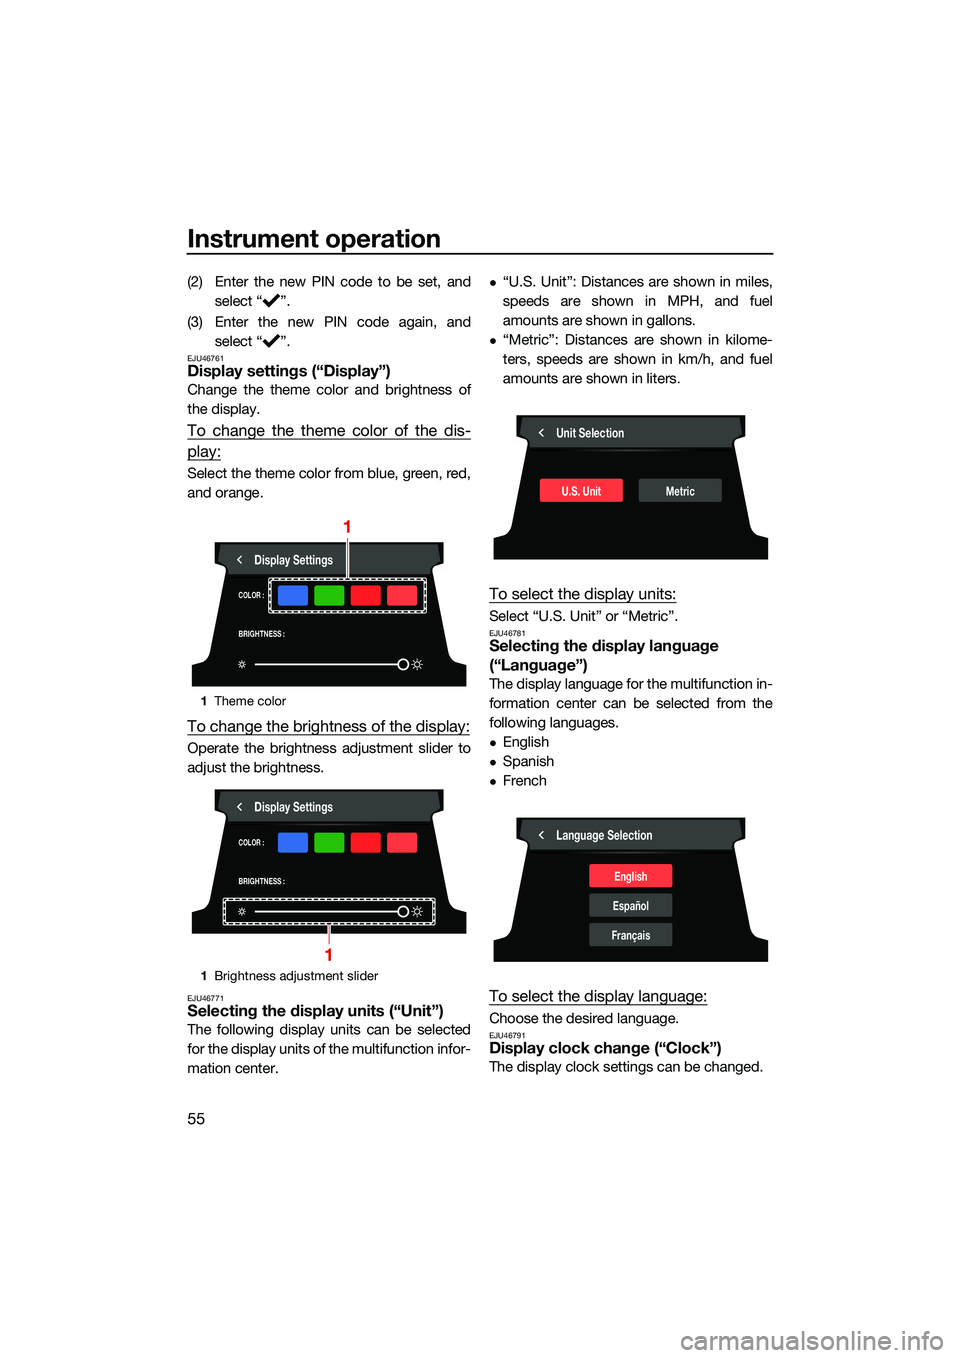 YAMAHA FX HO CRUISER 2022  Owners Manual Instrument operation
55
(2) Enter the new PIN code to be set, andselect “ ”.
(3) Enter the new PIN code again, and select “ ”.
EJU46761Display settings (“Display”)
Change the theme color a